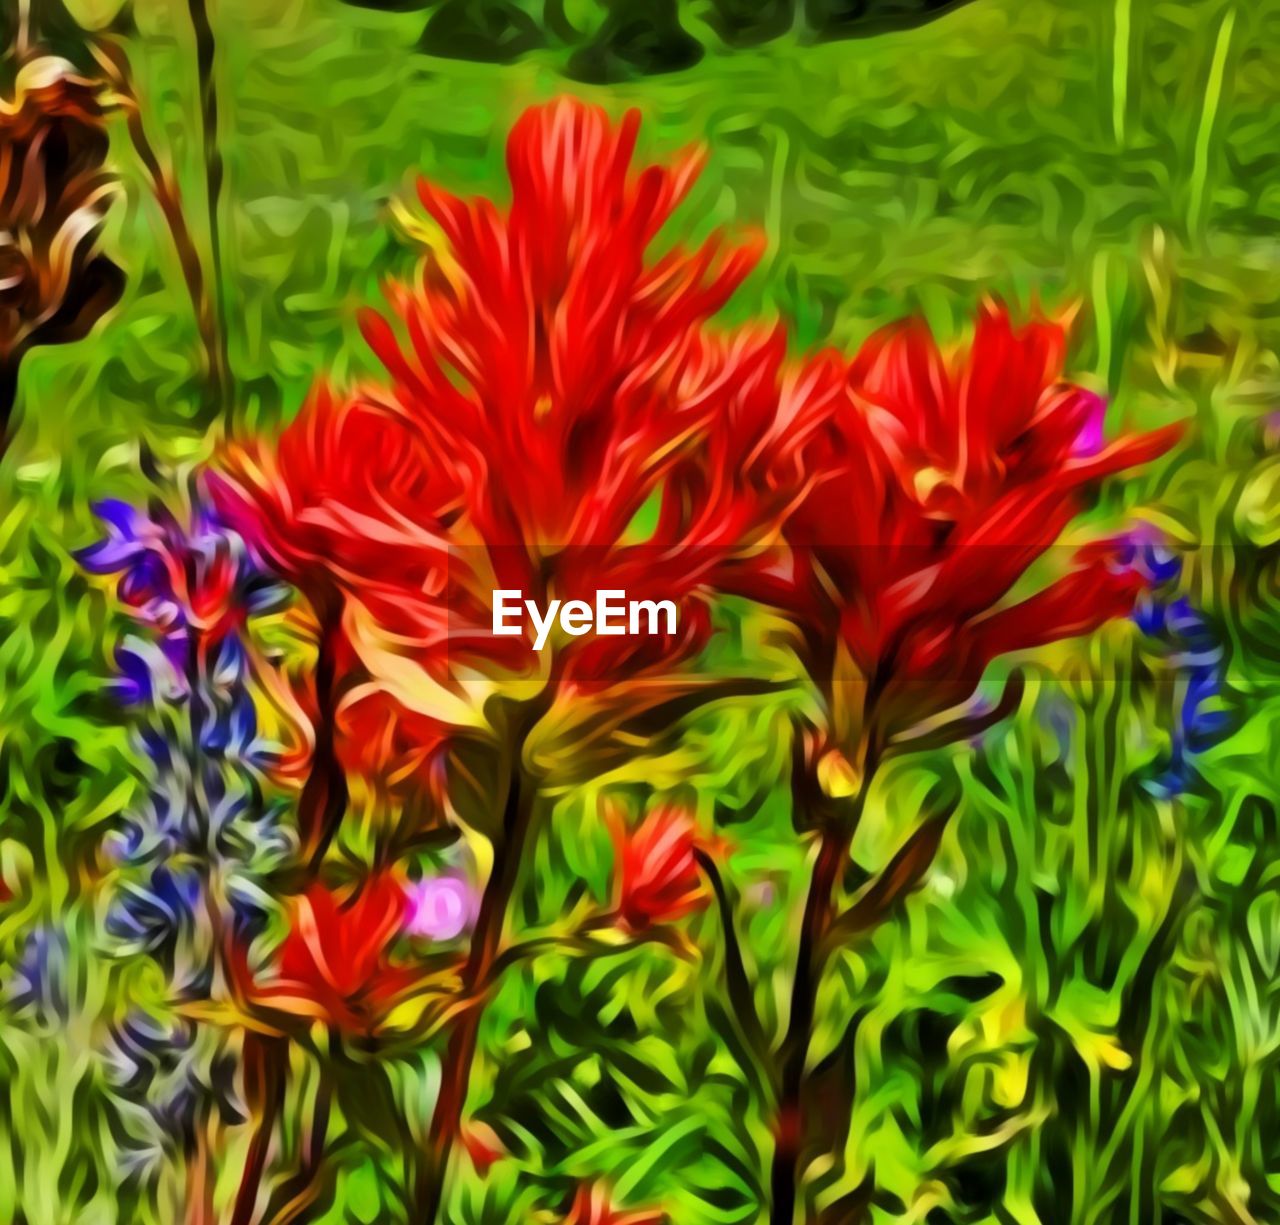 plant, flower, flowering plant, beauty in nature, freshness, growth, close-up, fragility, green, petal, leaf, plant part, nature, flower head, inflorescence, no people, red, multi colored, day, botany, lily, outdoors, grass, vibrant color